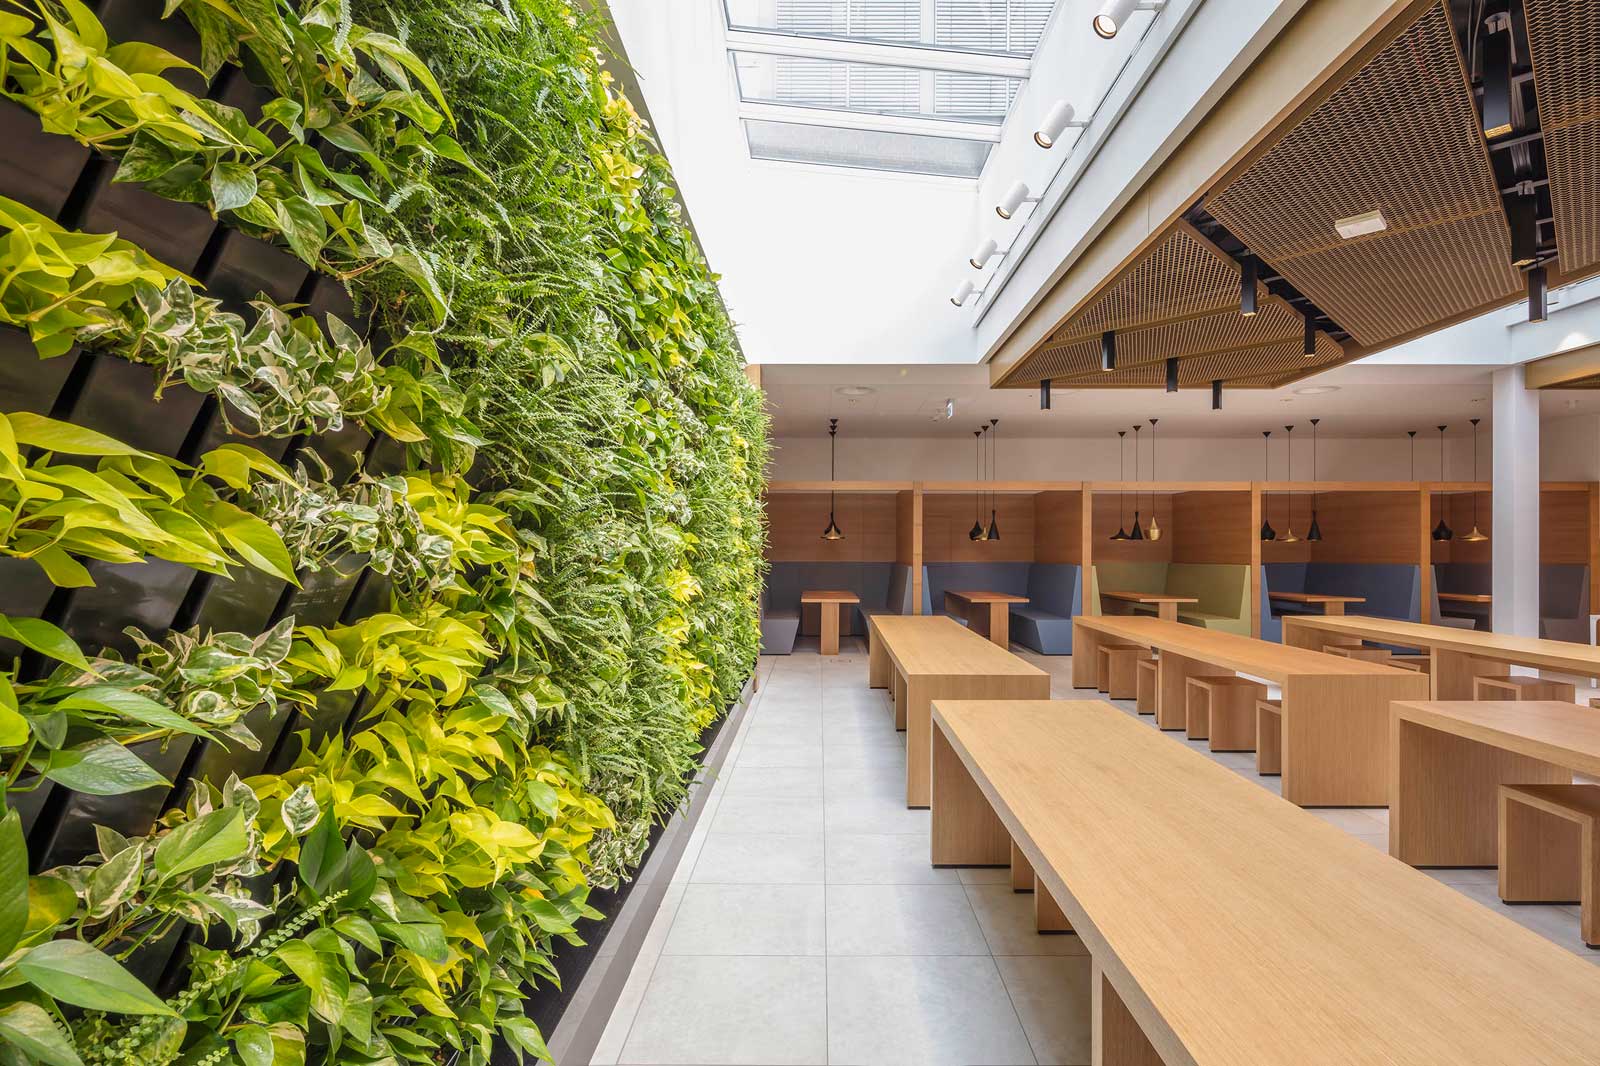 Green planted walls at canteen at RWE Campus in Essen